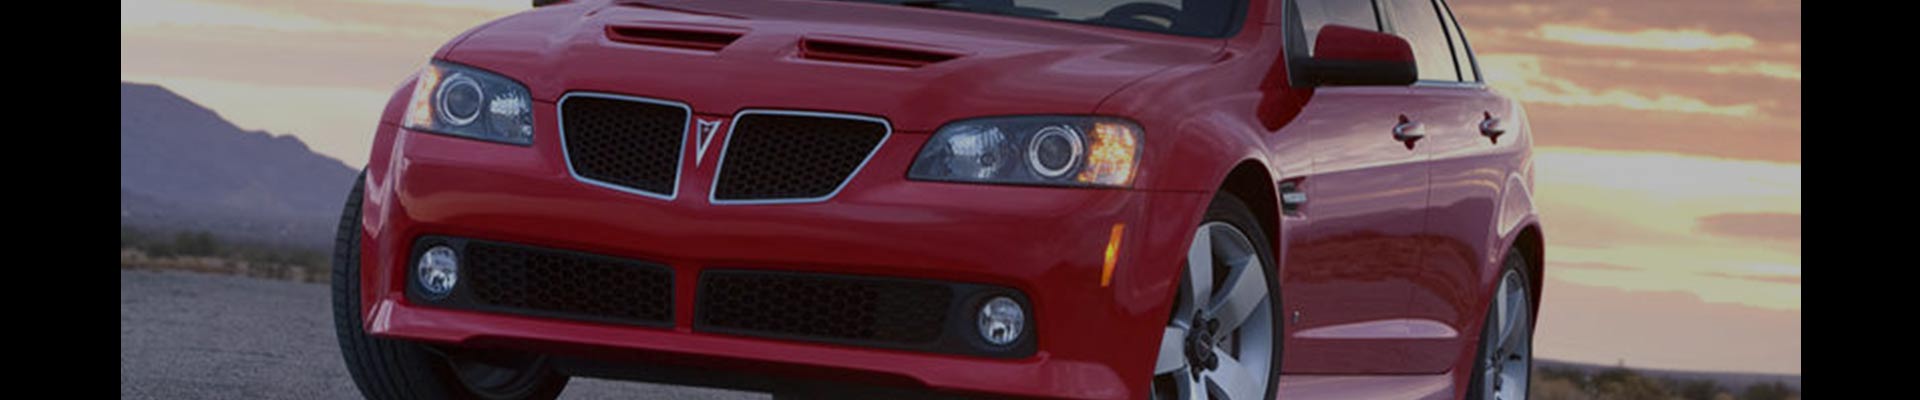 Shop Replacement and OEM 2008 Pontiac G8 Parts with Discounted Price on the Net